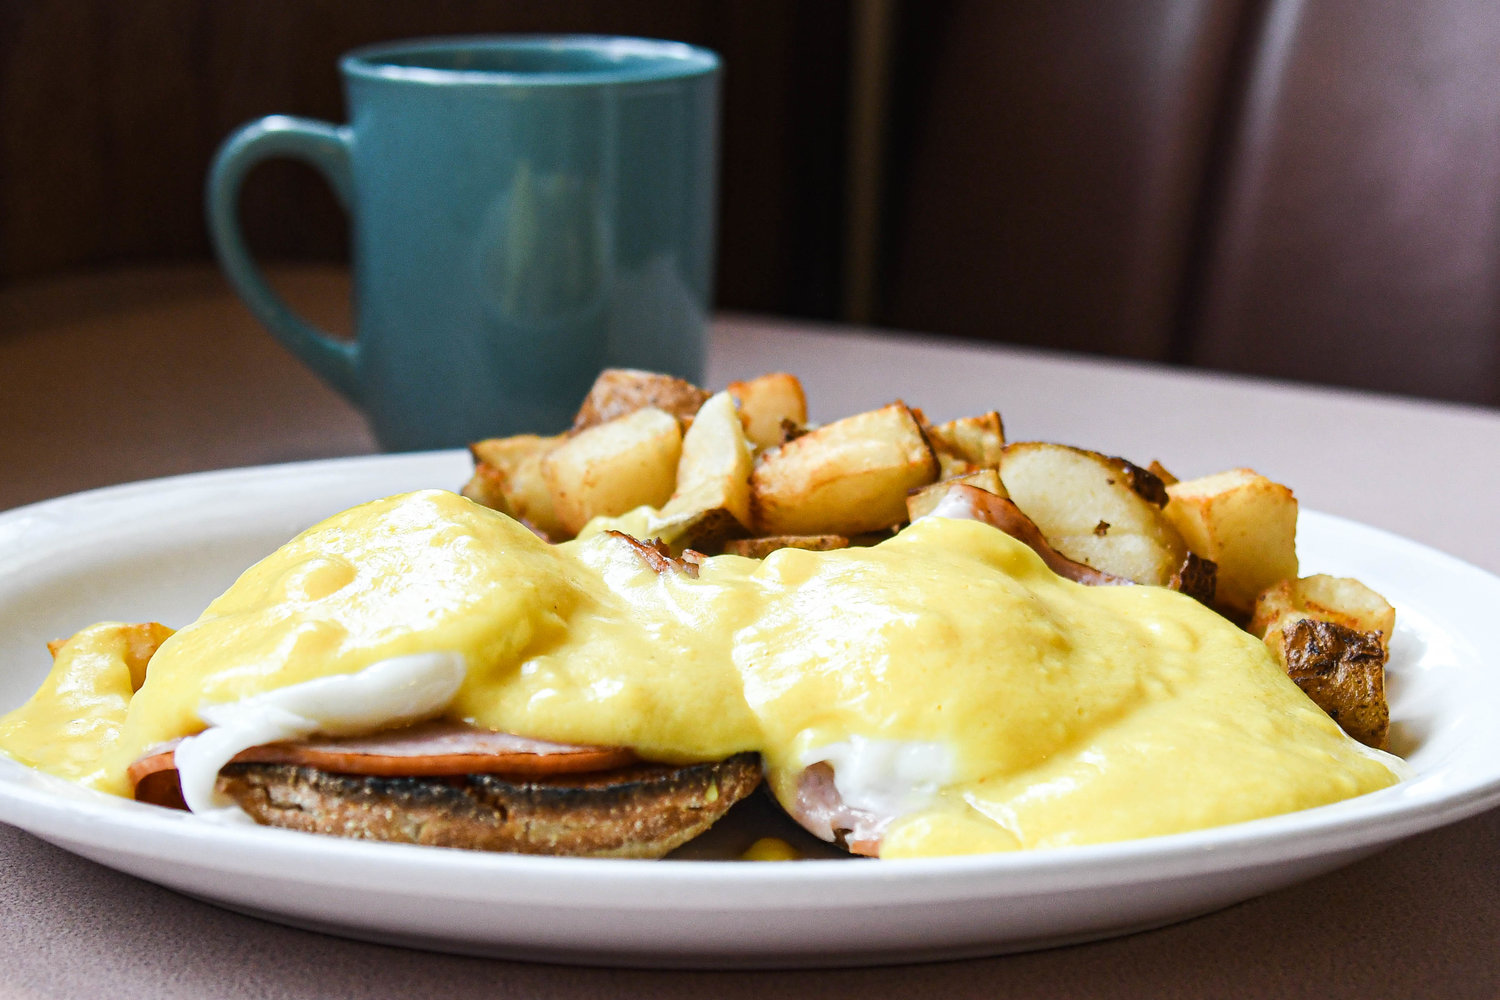 Eggs Benedict with home fries from Charlie’s Place in Clinton.